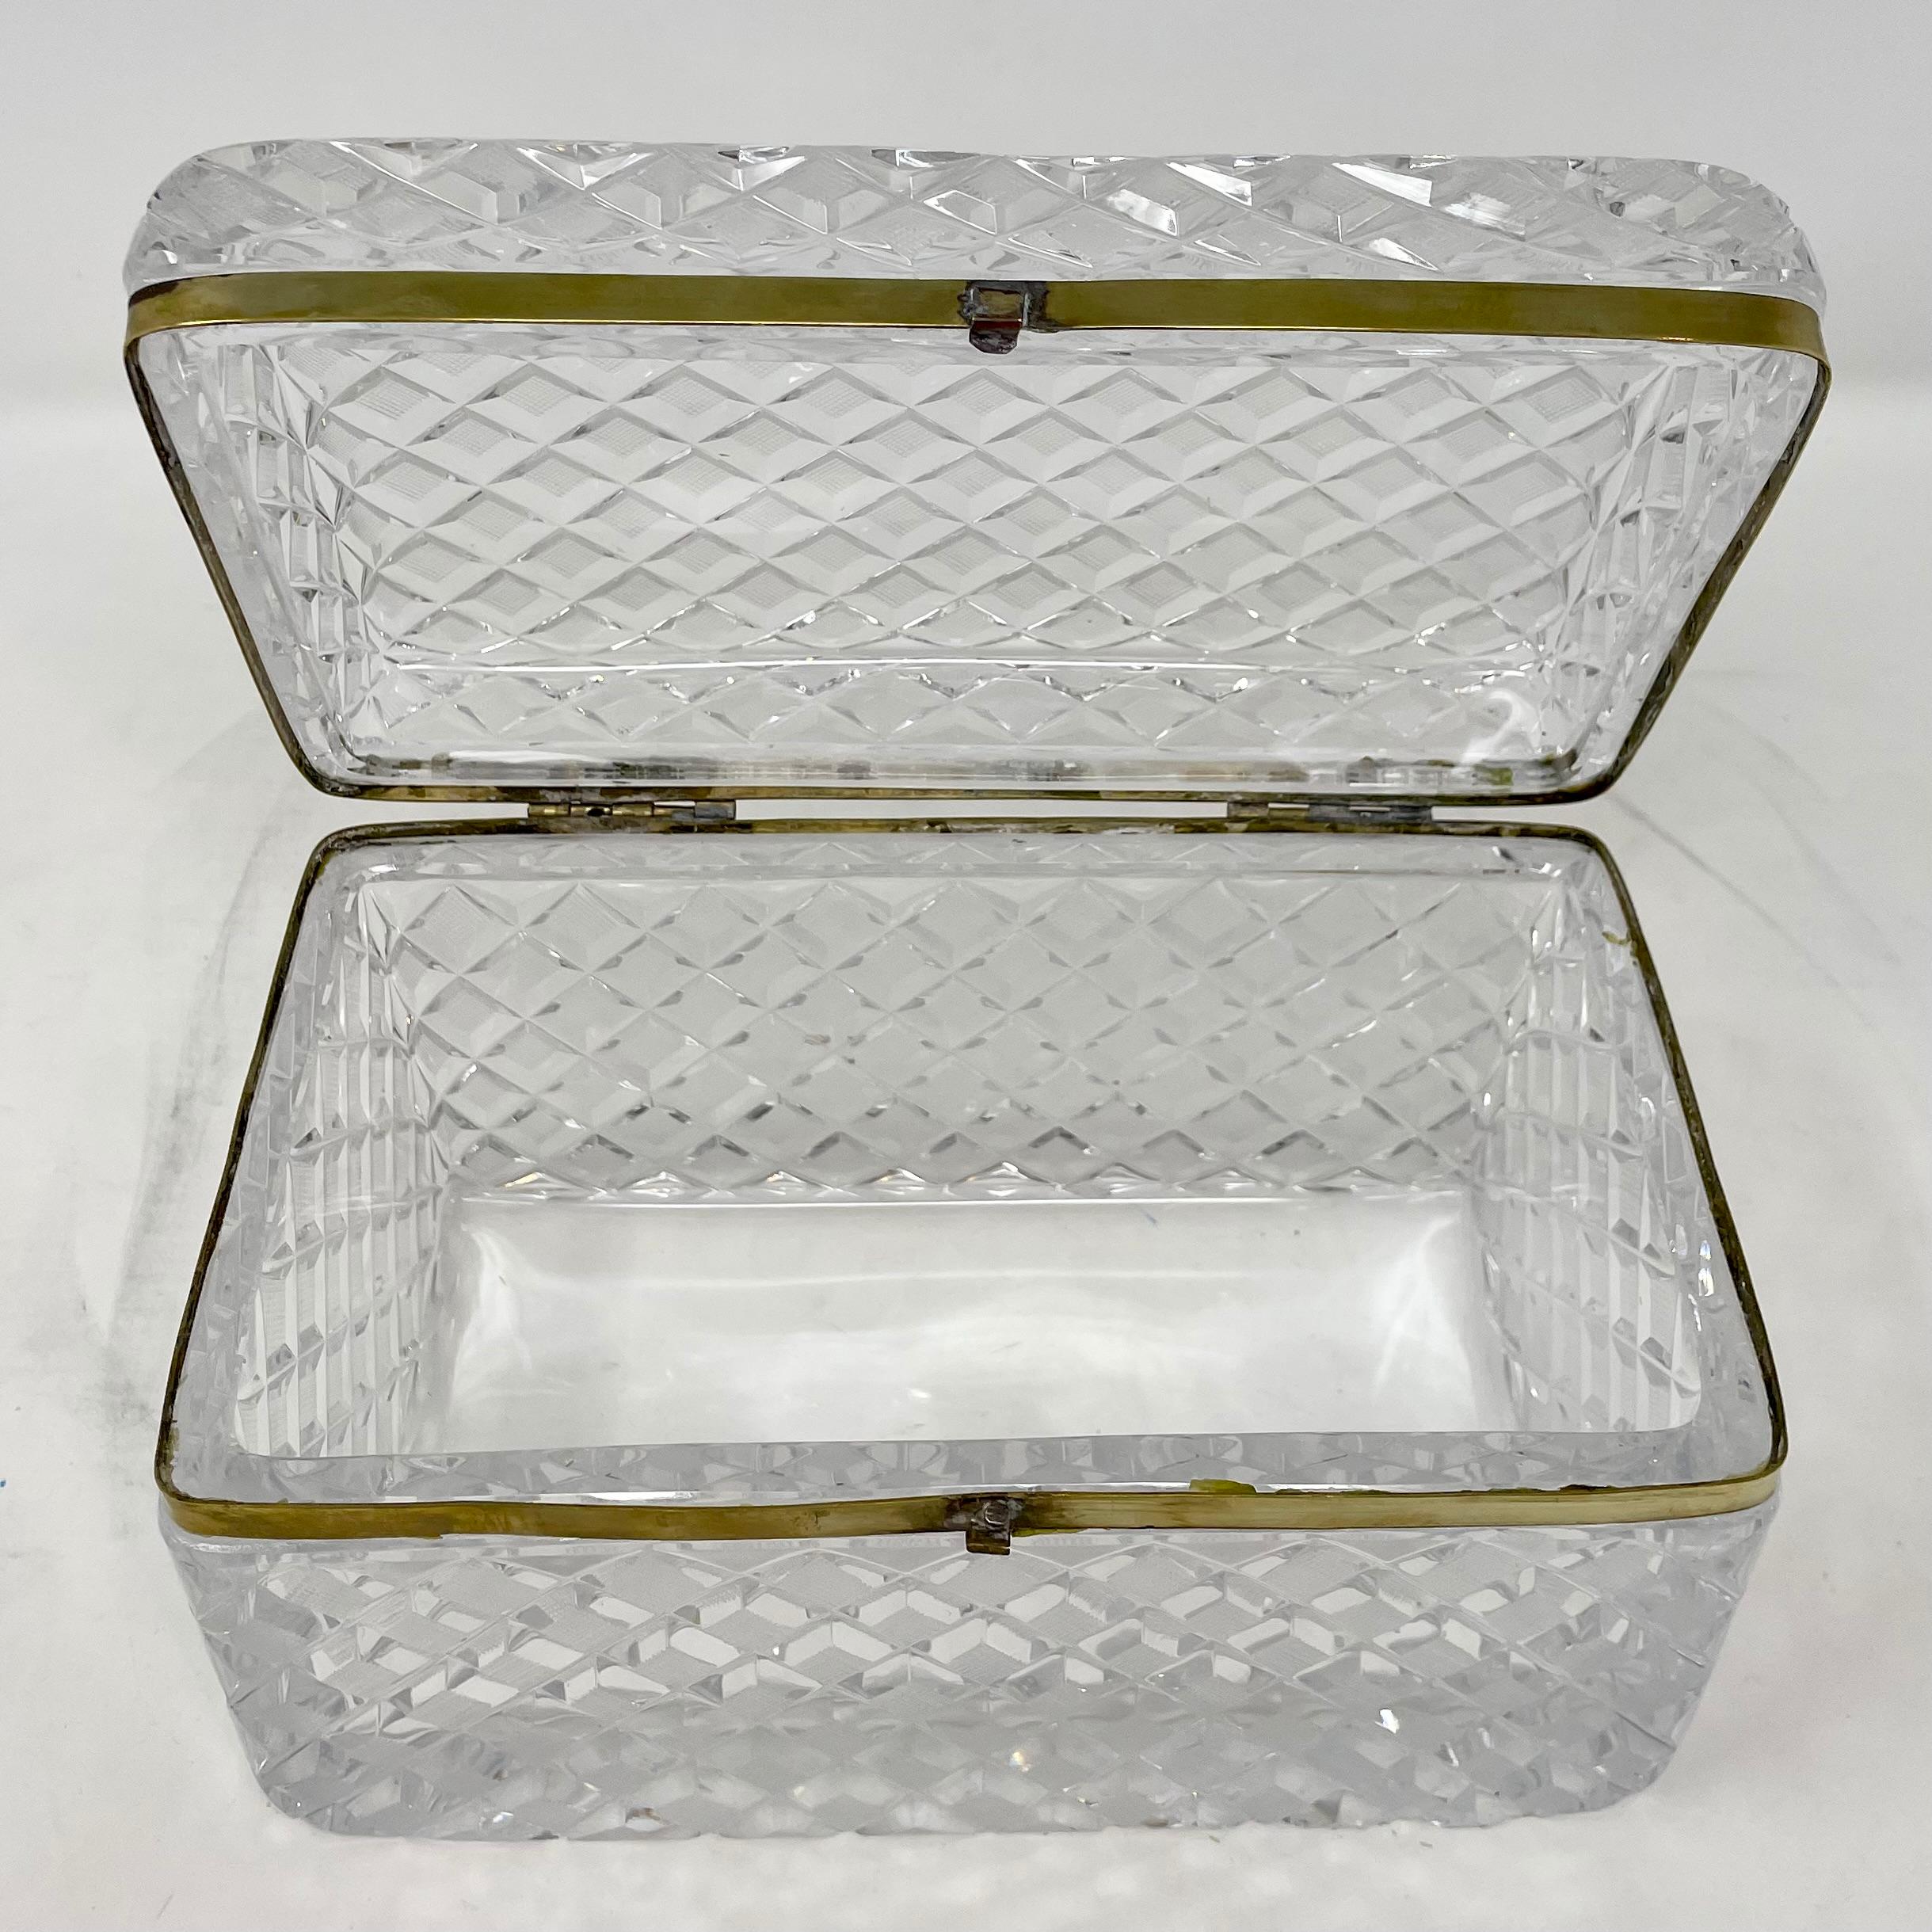 19th Century Antique French Cut Crystal and Gold Bronze Jewel Box, circa 1890-1900